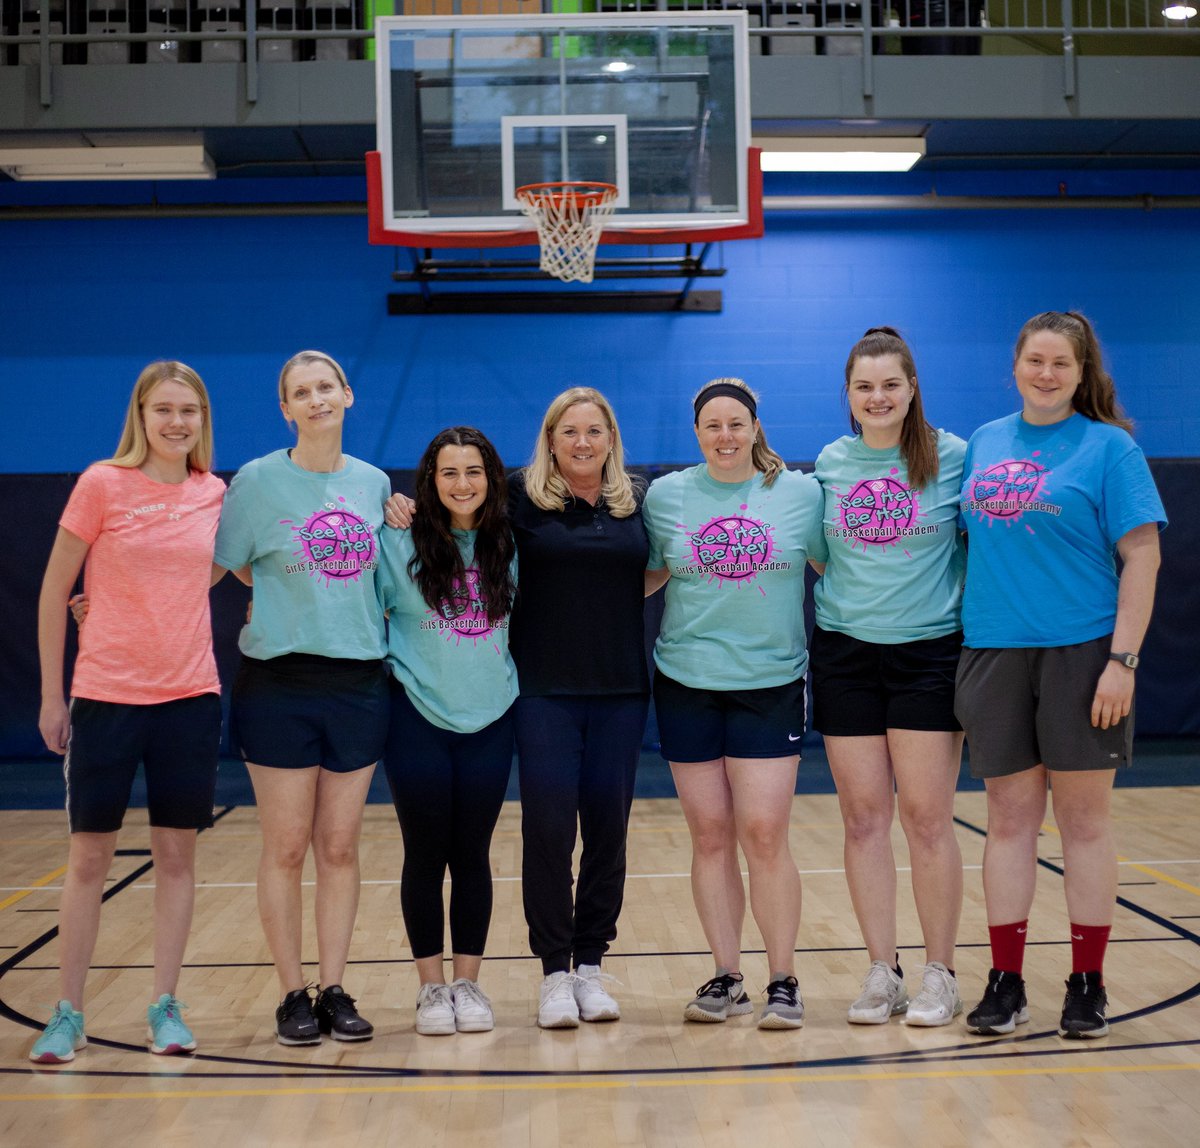 The biggest thank you to @usabasketball Olympic gold medalist and former @wnba player, @suzieserio, for speaking with our #SeeHerBeHer Girls Basketball Academy this past Tuesday! Thank you Suzie for your inspiring words and helping empower the next generation of female leaders!